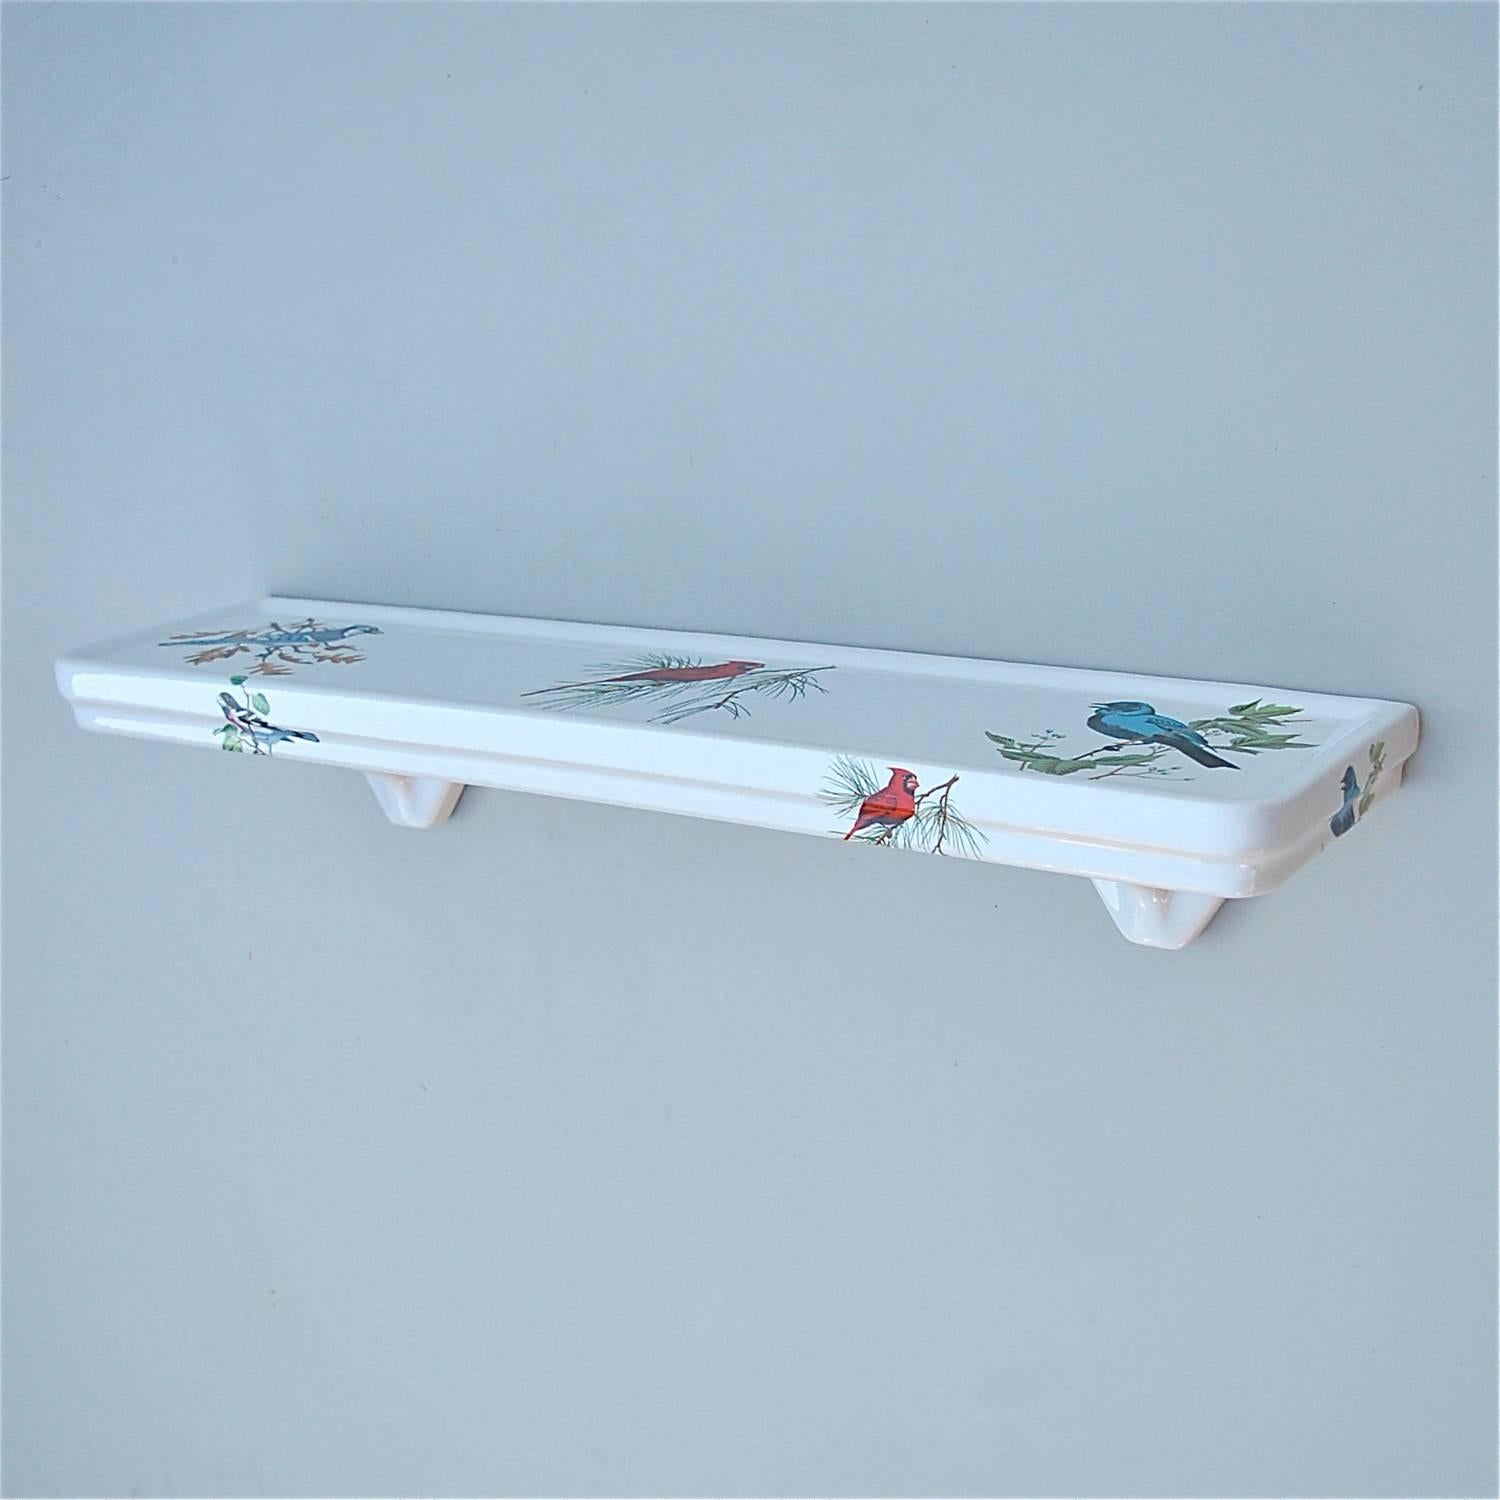 Vintage, retro bathroom shelf or vanity shelf made from solid French porcelain. Usually these period wall-mounted bathroom salvage elements are made from plain white porcelain. The transfer printed decoration of three different types of bird makes